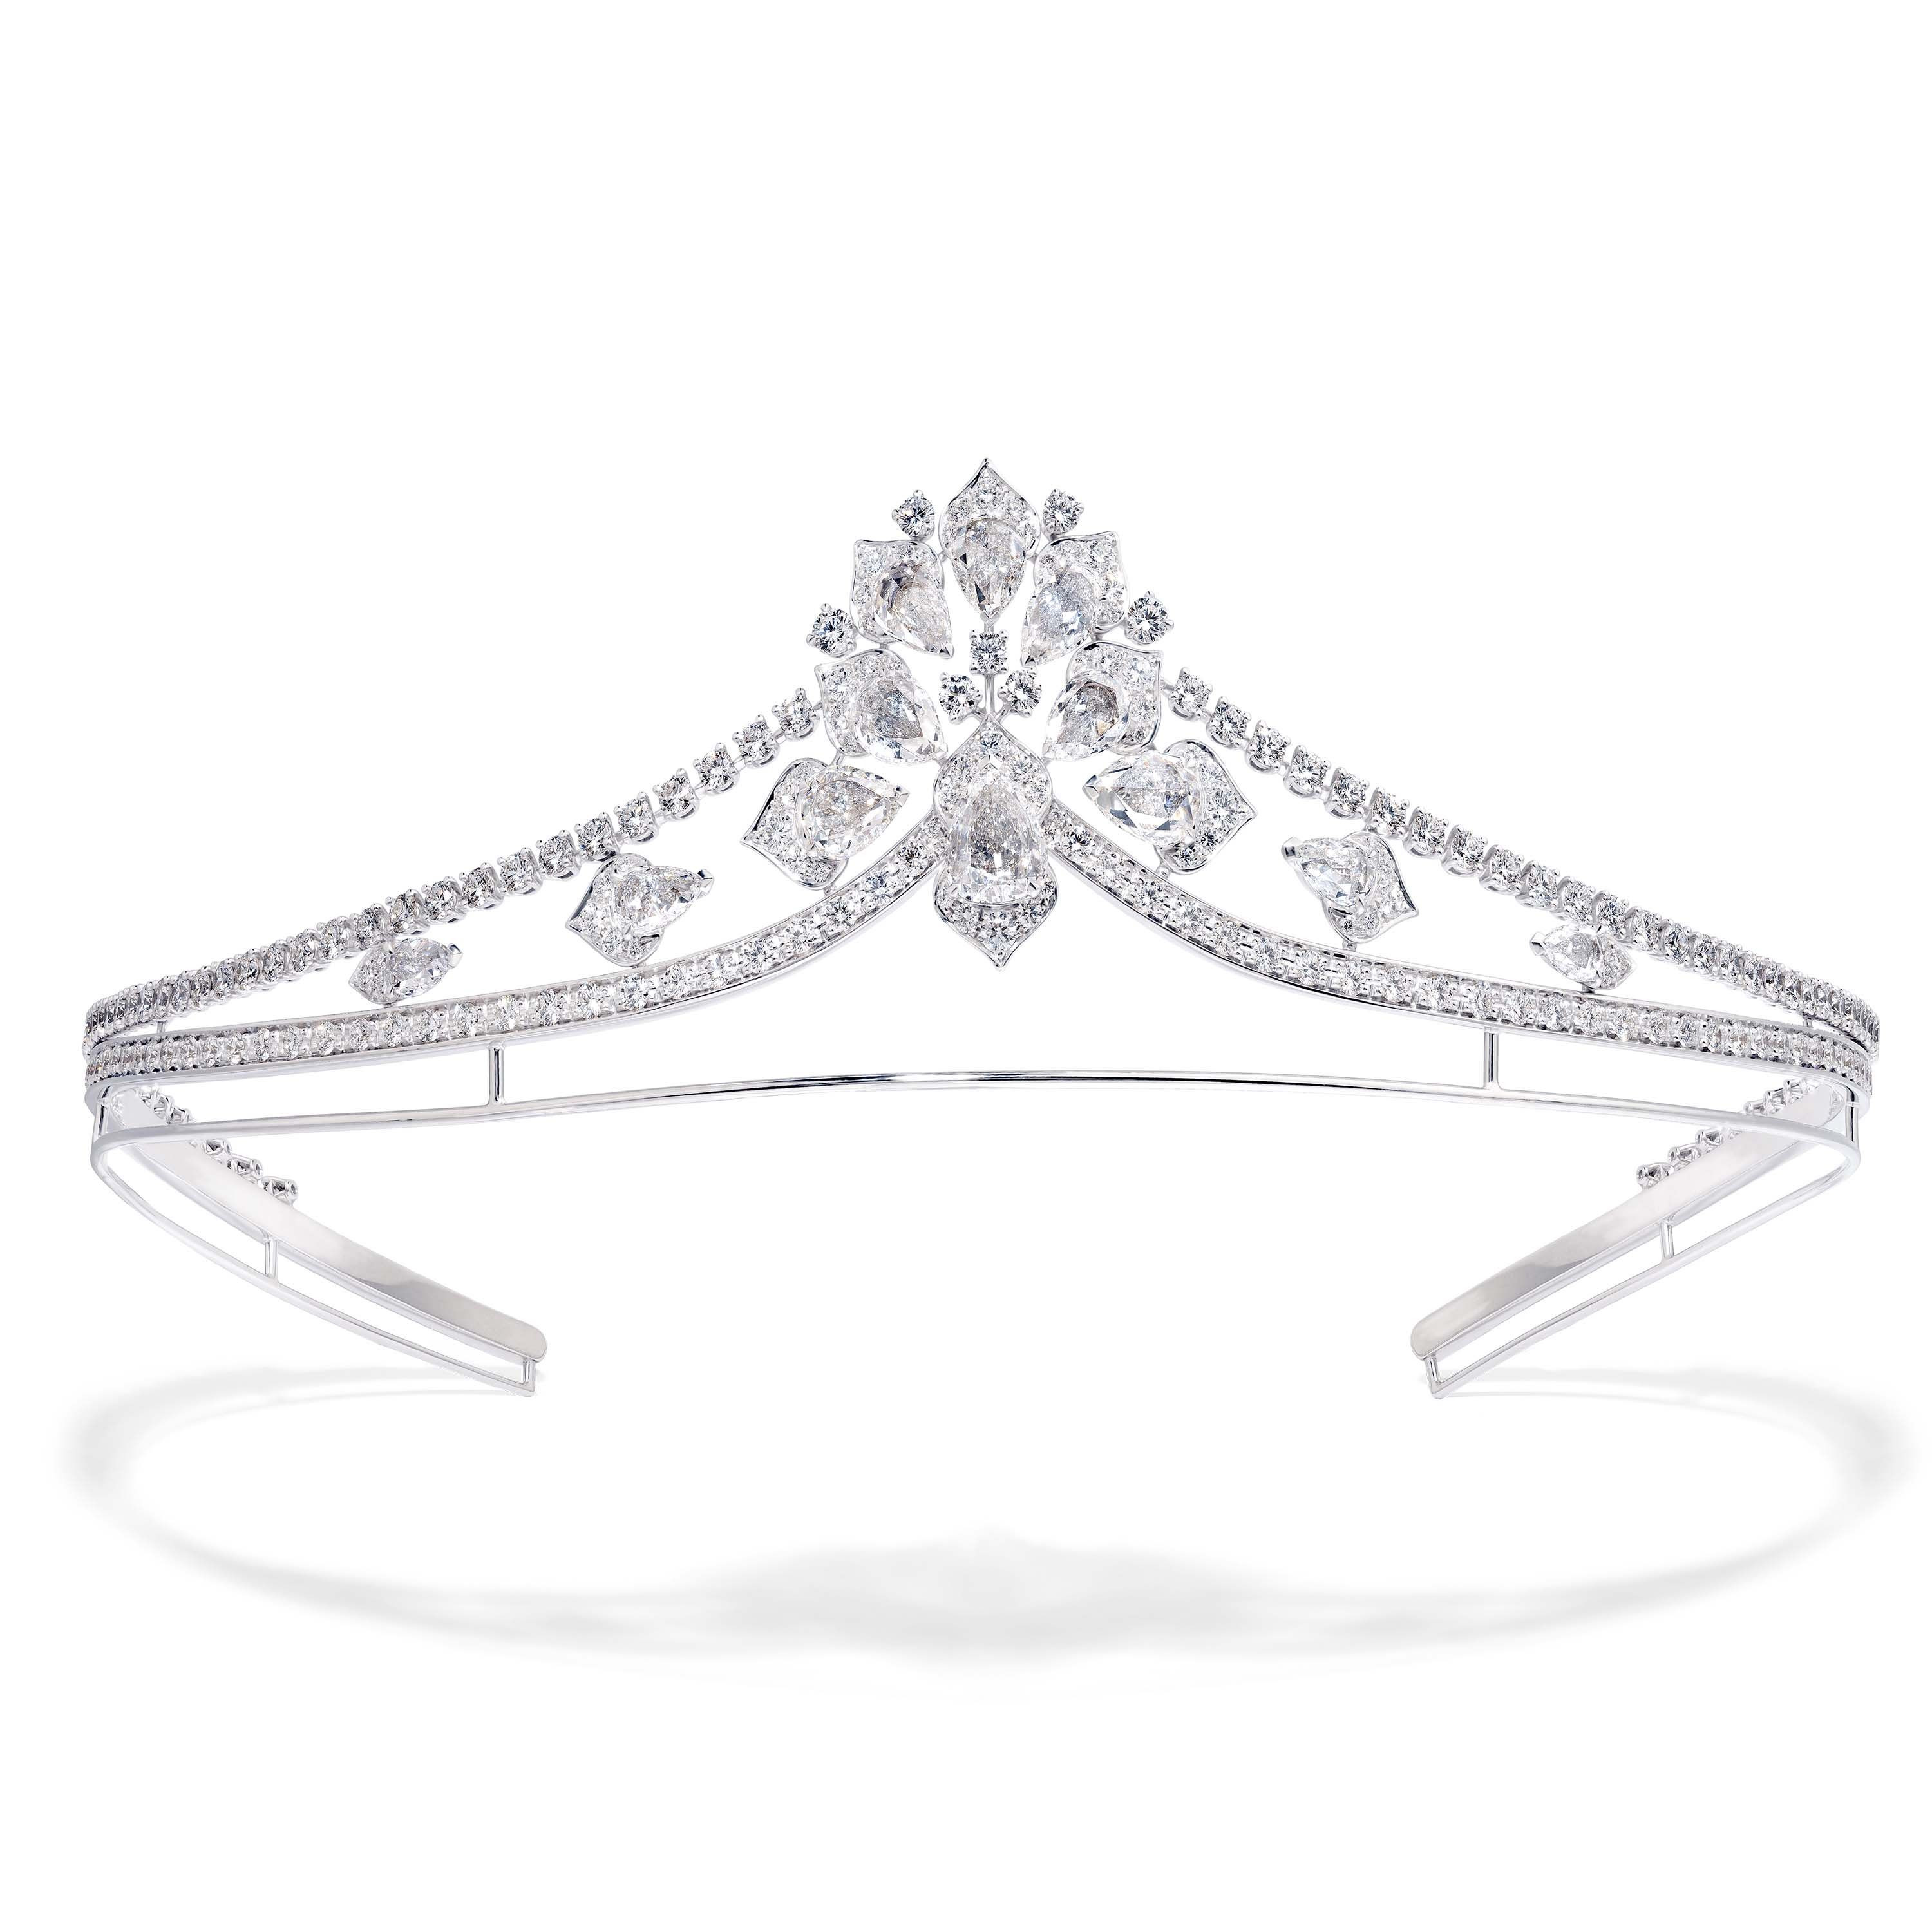 Chaumet: How To Style A Tiara For The Modern Woman 